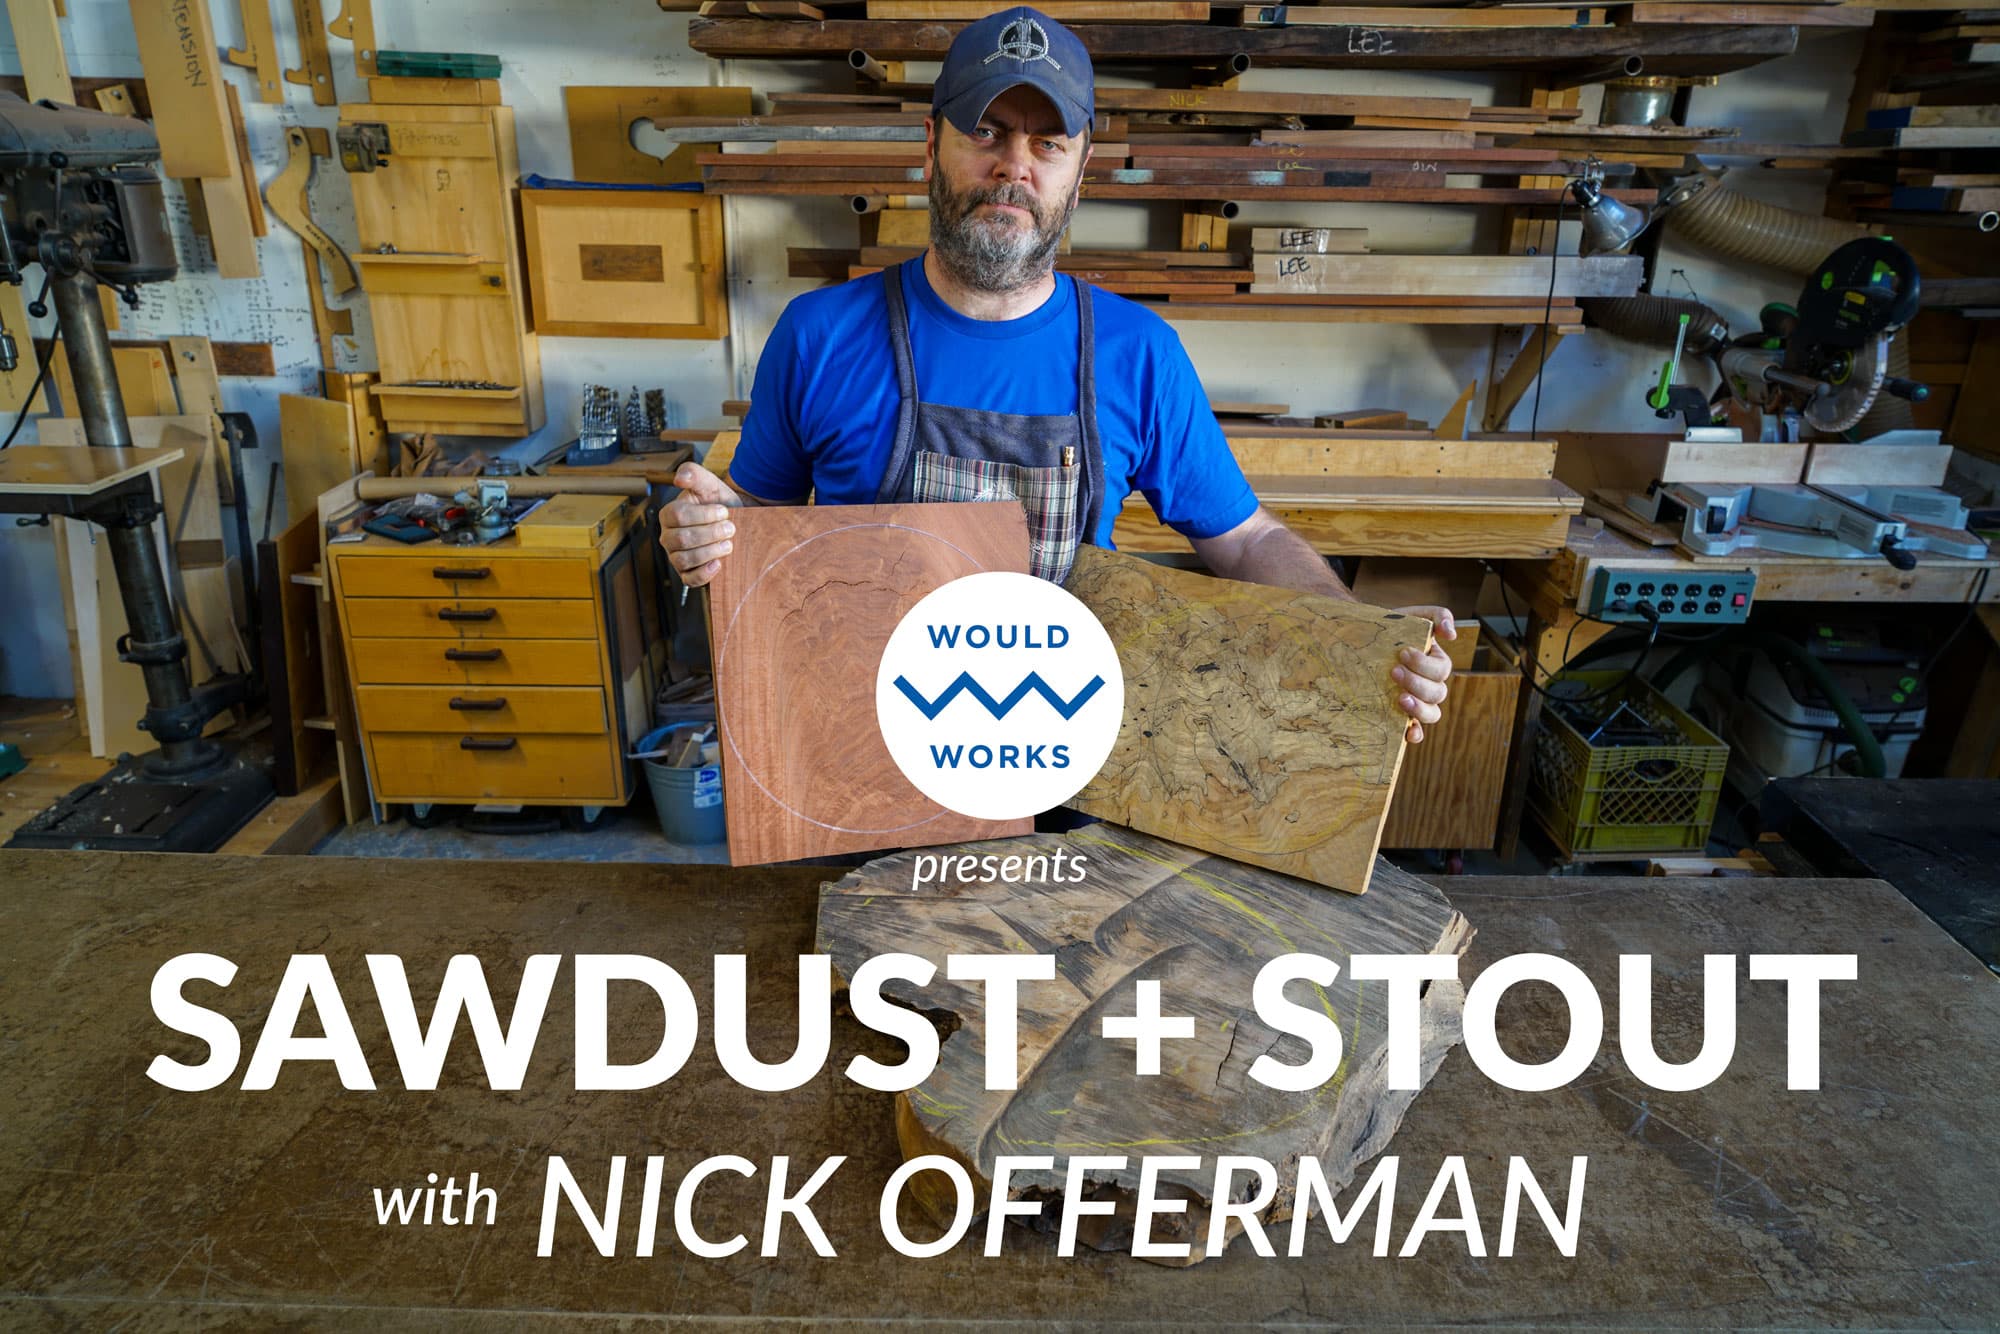 sawdust and stout, nick offerman, woodworking, would works fundraiser